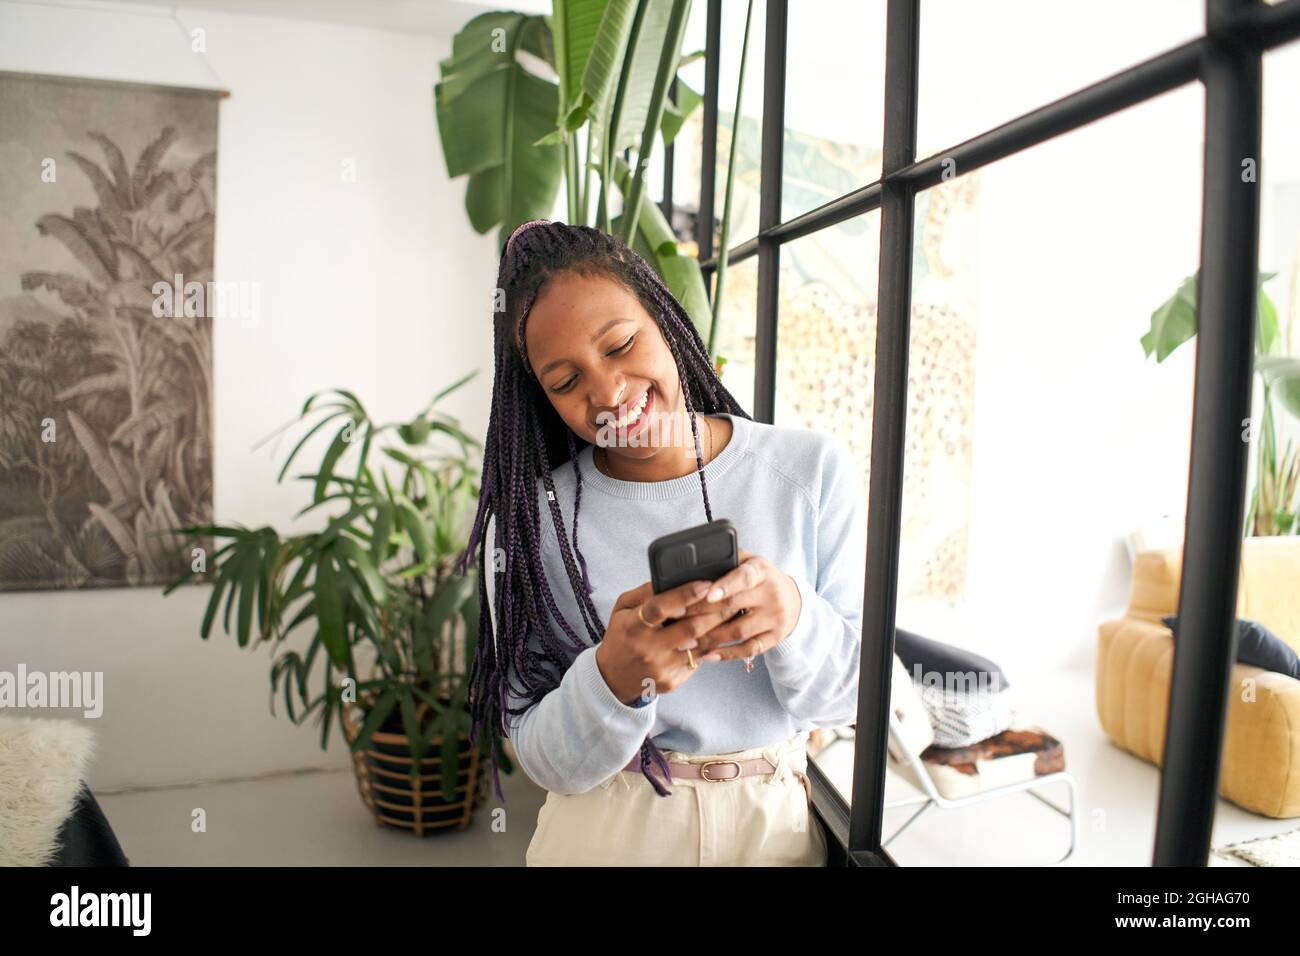 Young African American woman chatting on her smart phone. Smiling girl using a cell phone in a modern loft. Stock Photo